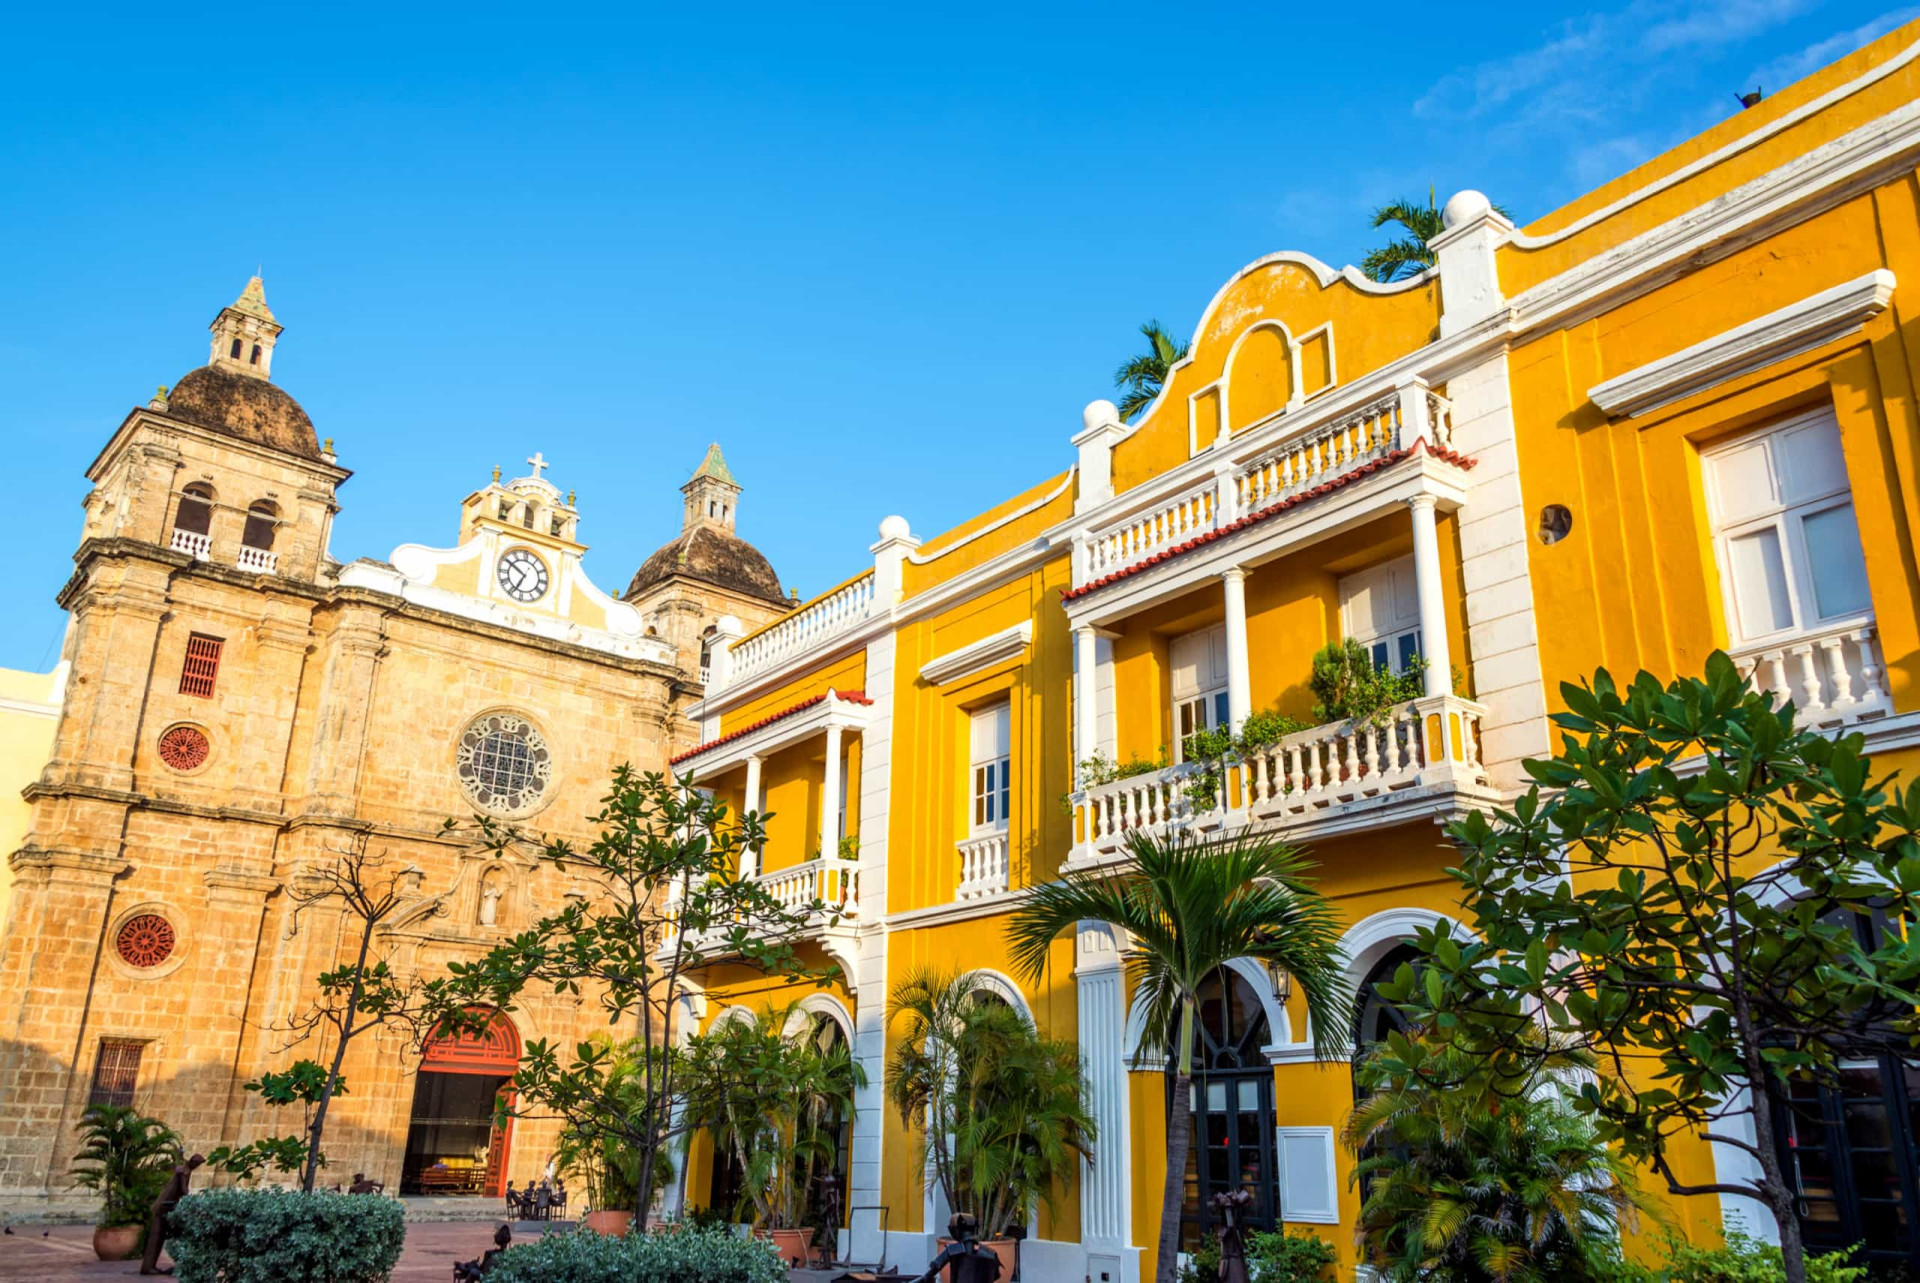 As a major port city, Cartagena can get a tad busy. But it's the old walled city you want to head for. Inside is a wealth of colonial-era churches, convents, and other 16th and 17th century buildings. Make sure to pause in San Pedro Claver Plaza (pictured). UNESCO has it all covered.